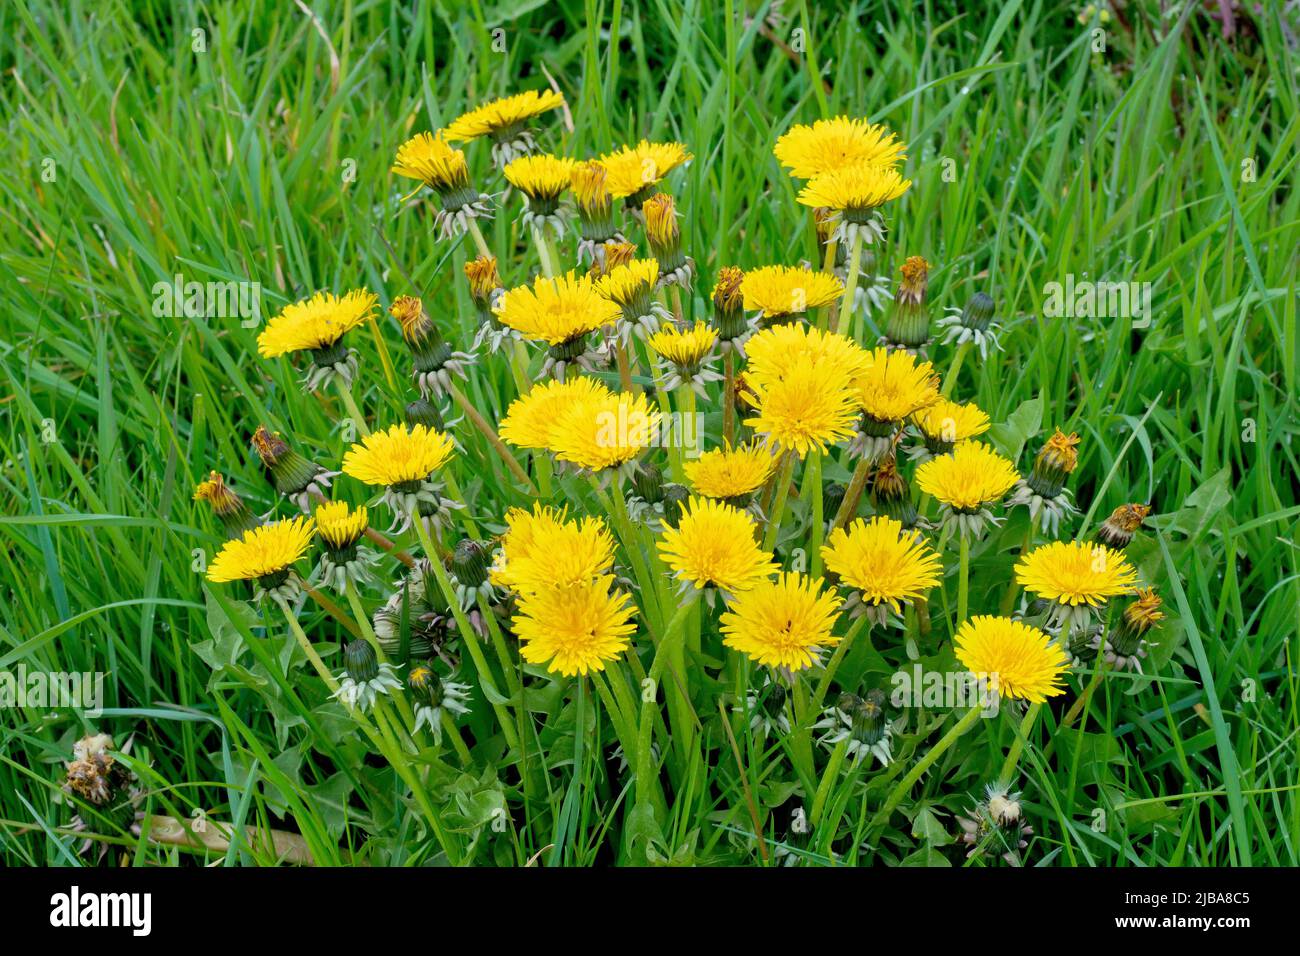 Dandelions (taraxacum officinalis), close up of a large stand of the common bright yellow wild flower growing in long grass. Stock Photo